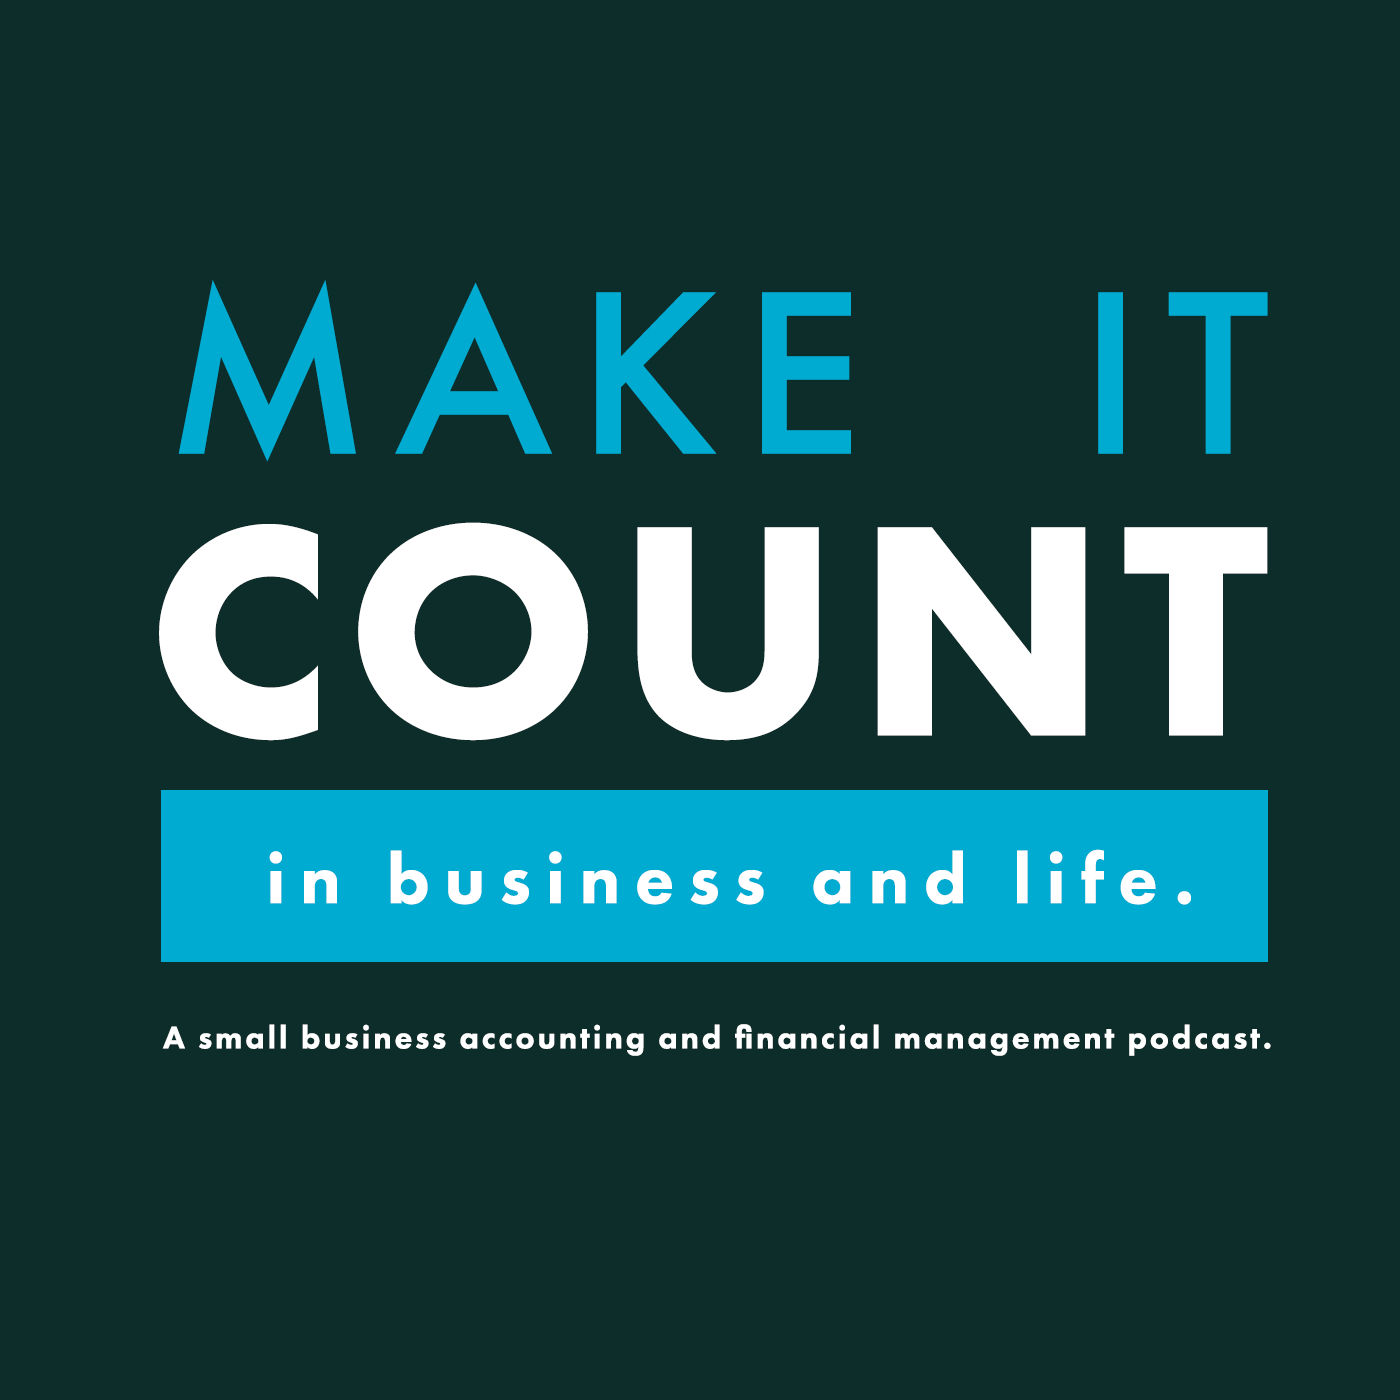 Company logo: Make it count in business and life